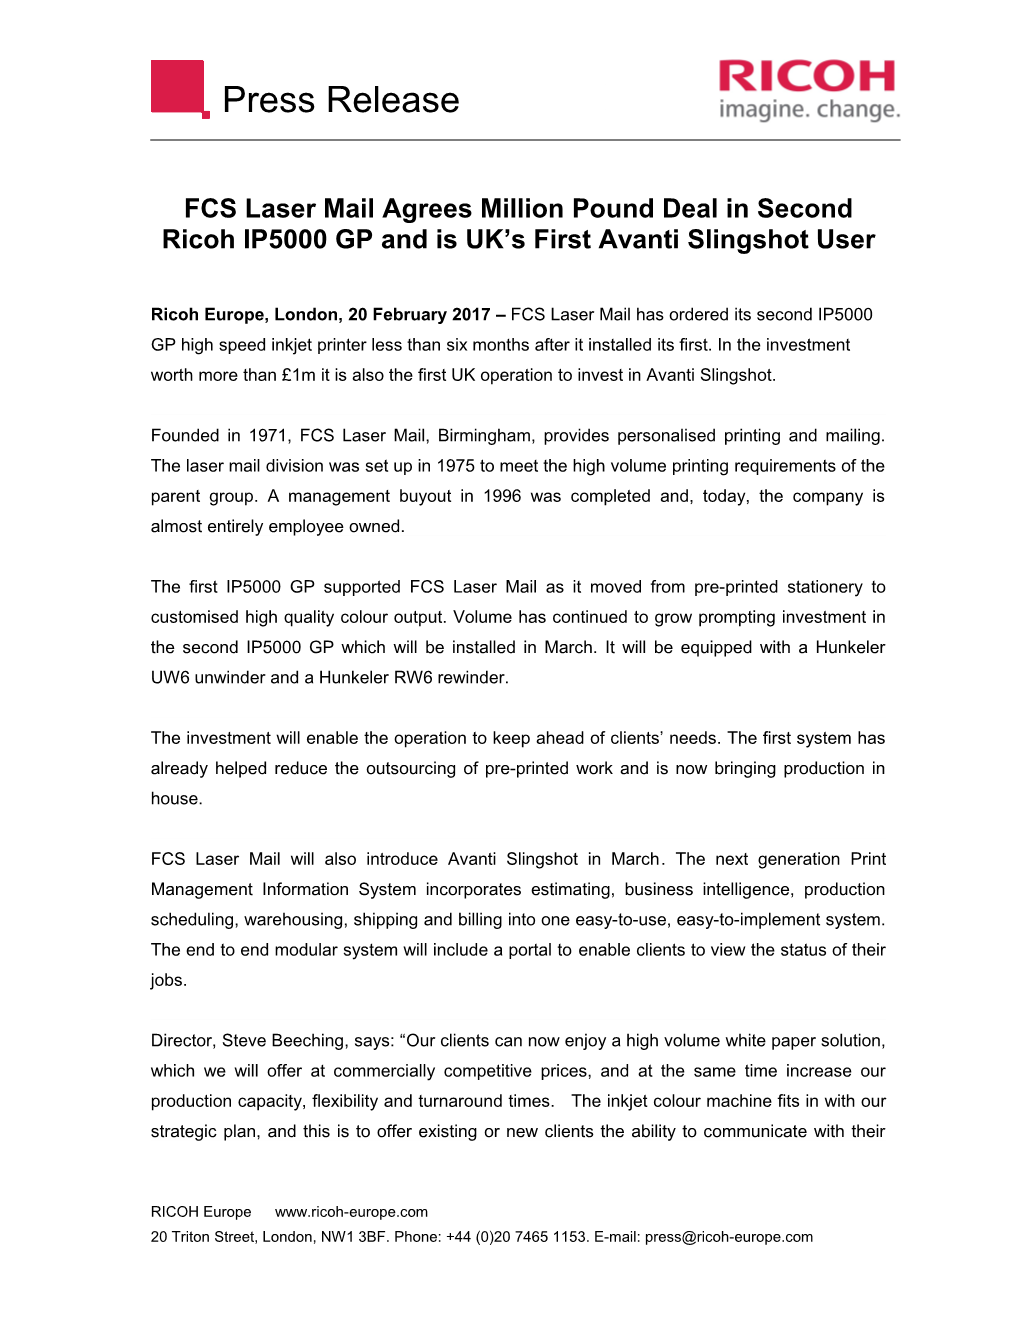 FCS Laser Mail Agrees Million Pound Deal in Second Ricoh IP5000 GP and Is UK S First Avanti